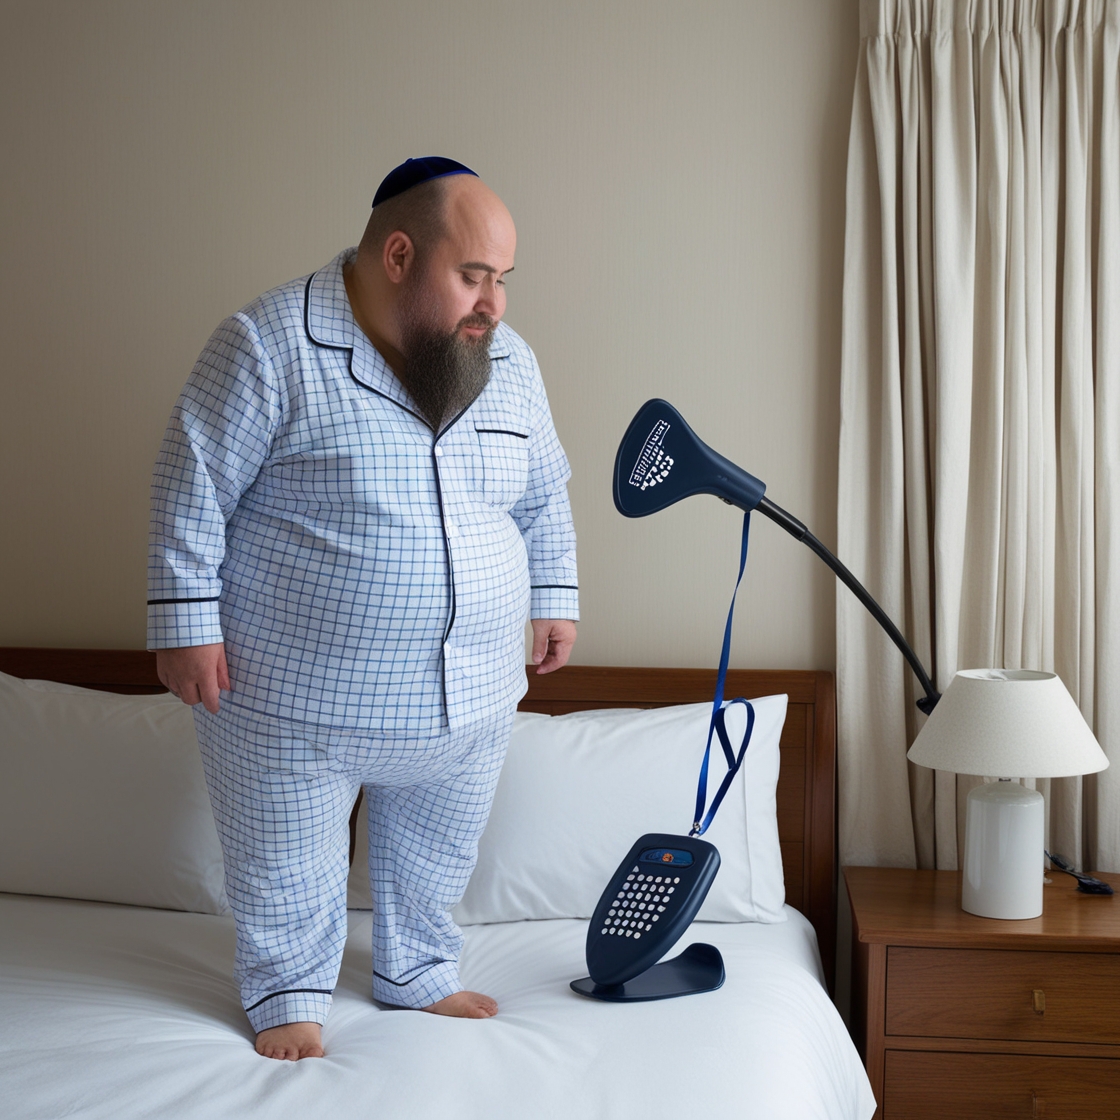 Default_A_fat_ultraorthodox_Jew_dressed_in_pajamas_gets_up_fro_3.jpg